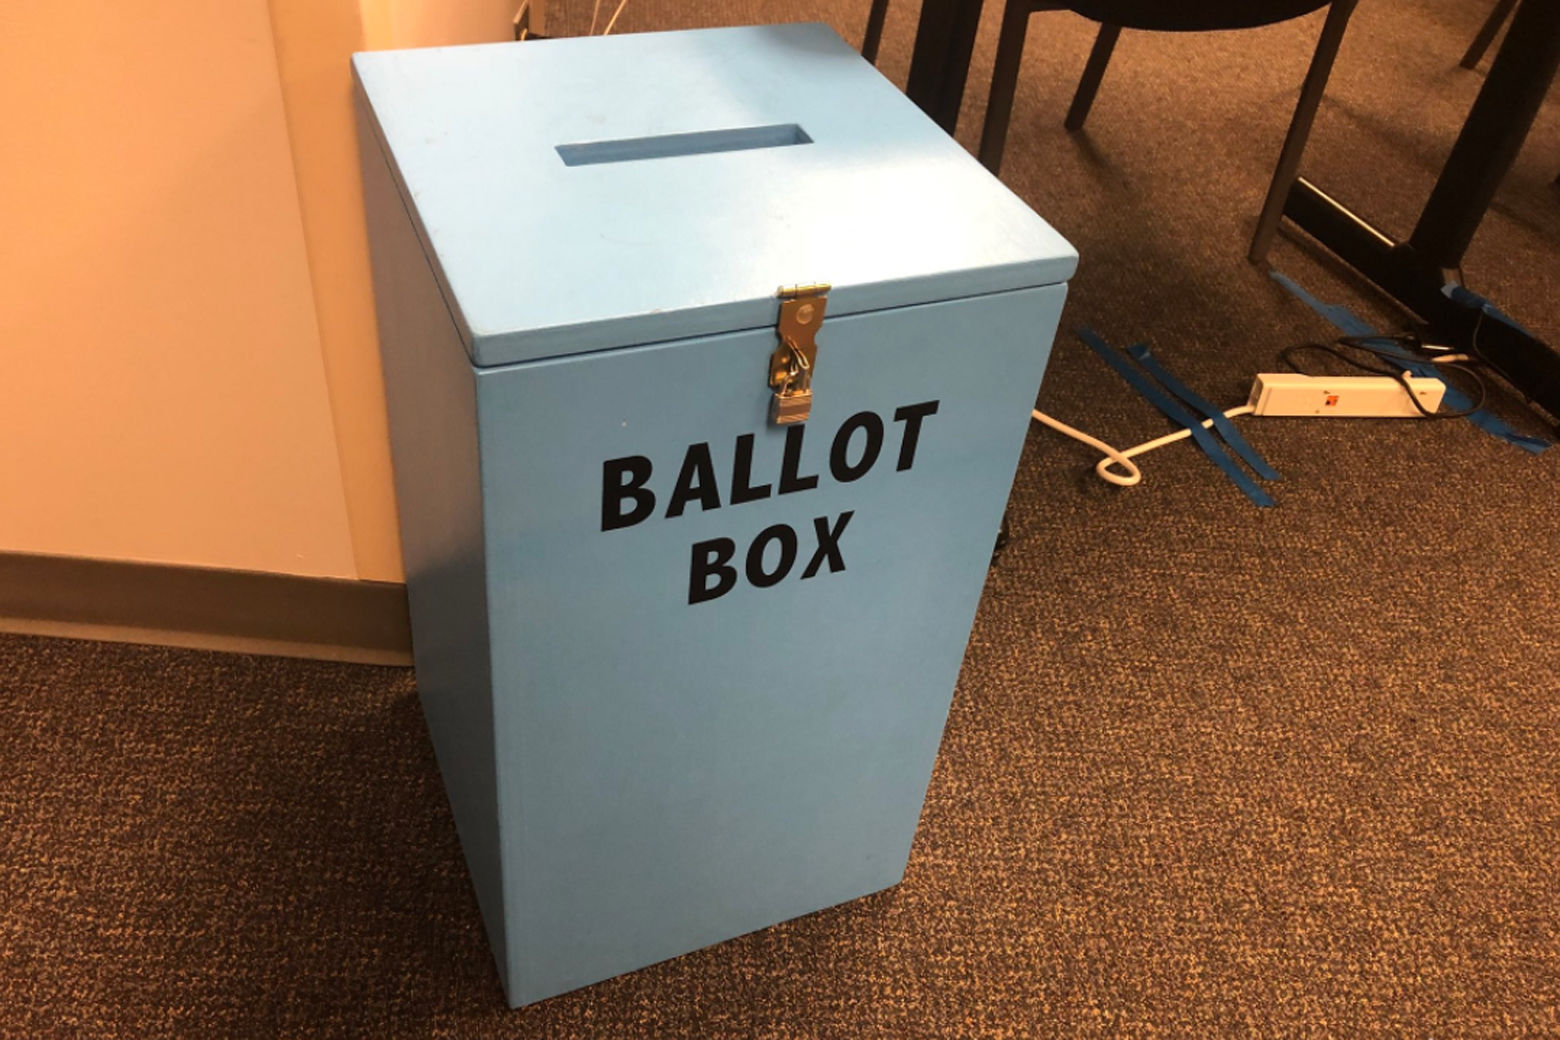 Fairfax County mailed out 151 ballots in the Democratic race as absentee voting began, the Office of Elections said. (WTOP/Max Smith)